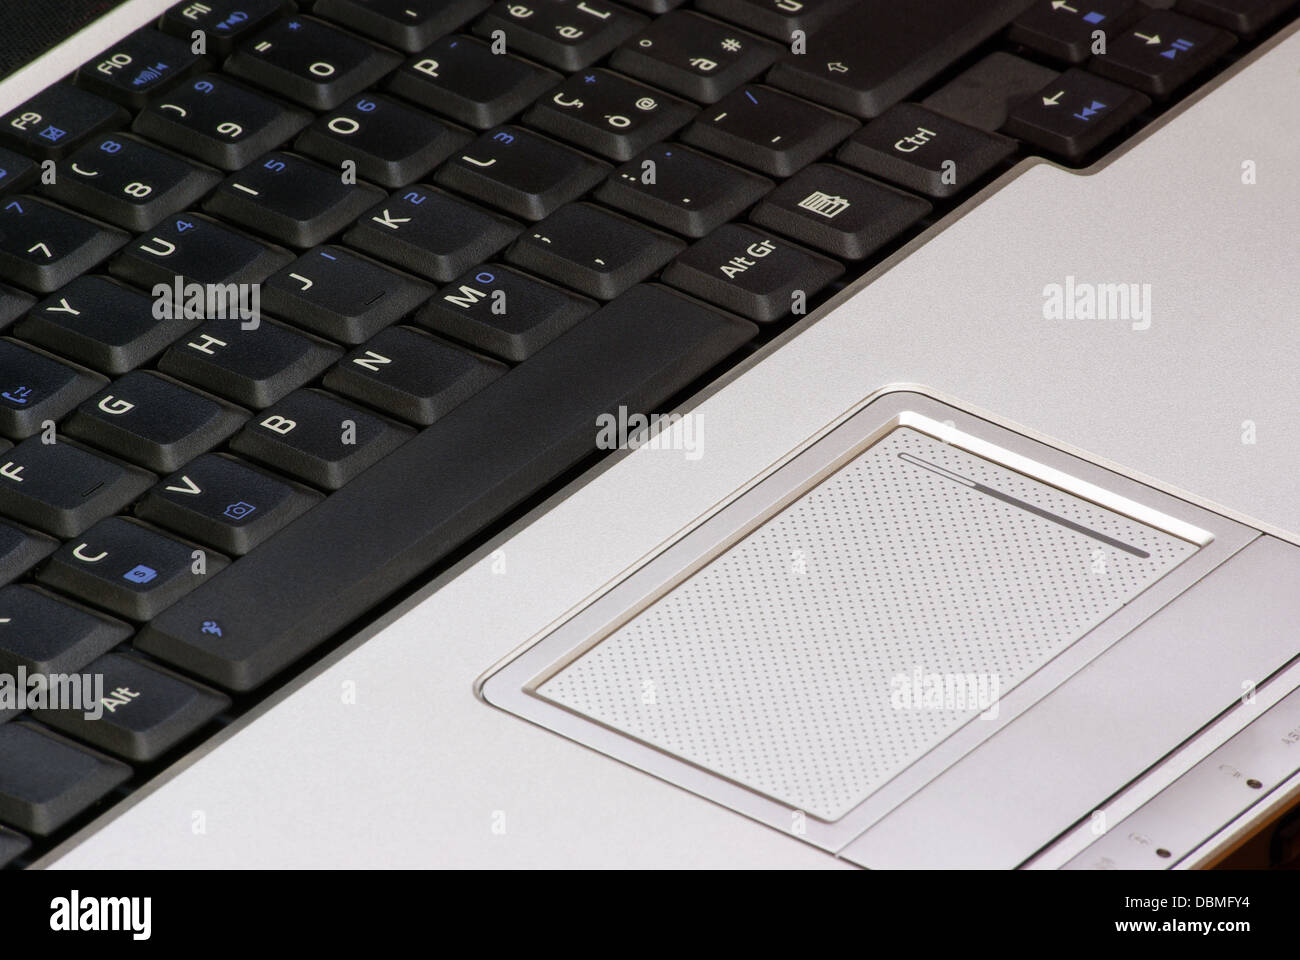 Notebook keyboard and touchpad Stock Photo